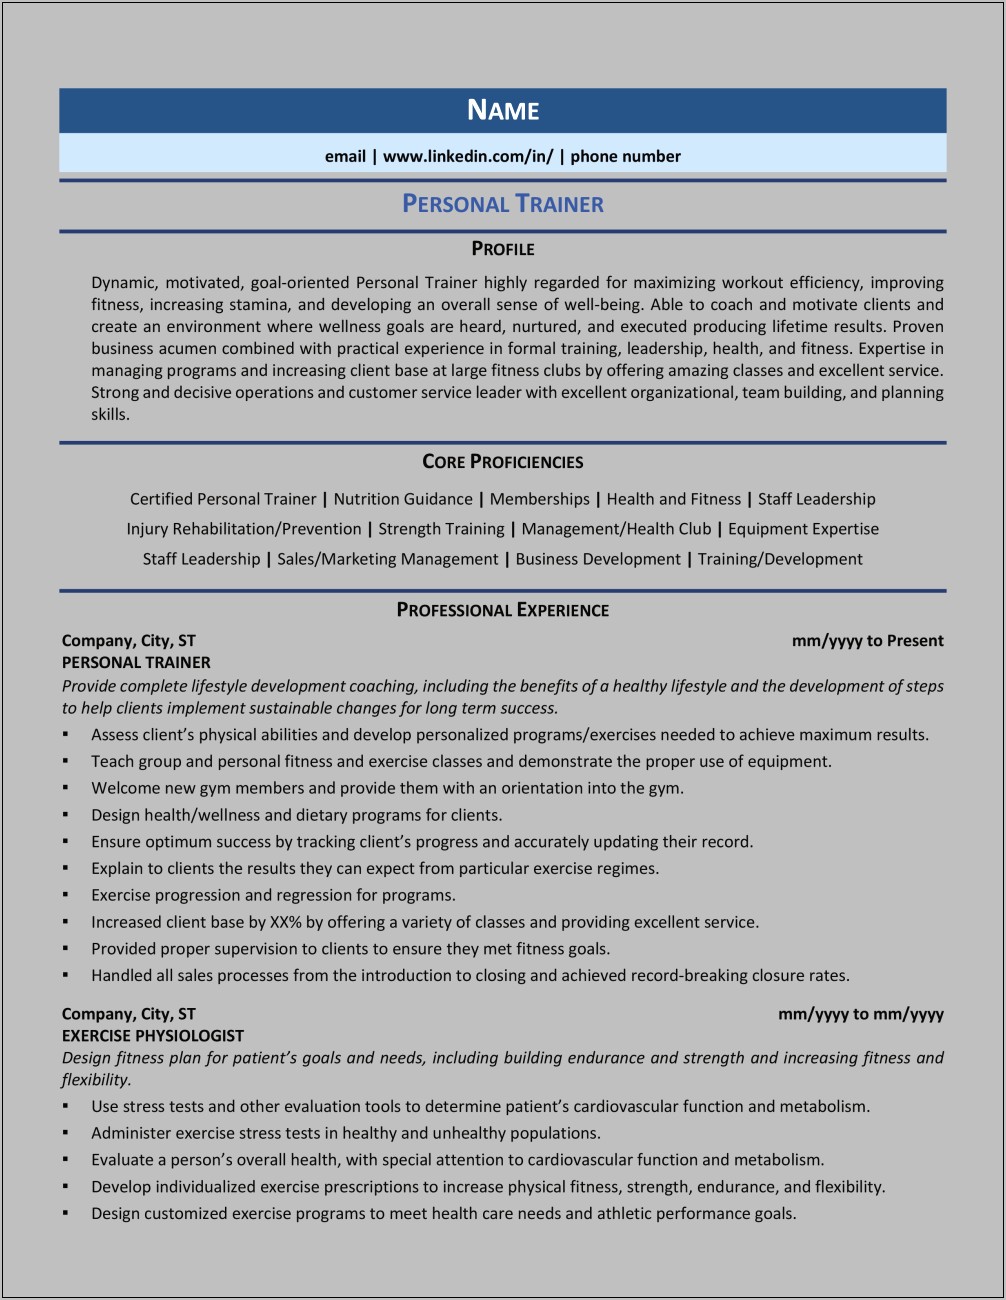 Certified Personal Trainer Resume Examples